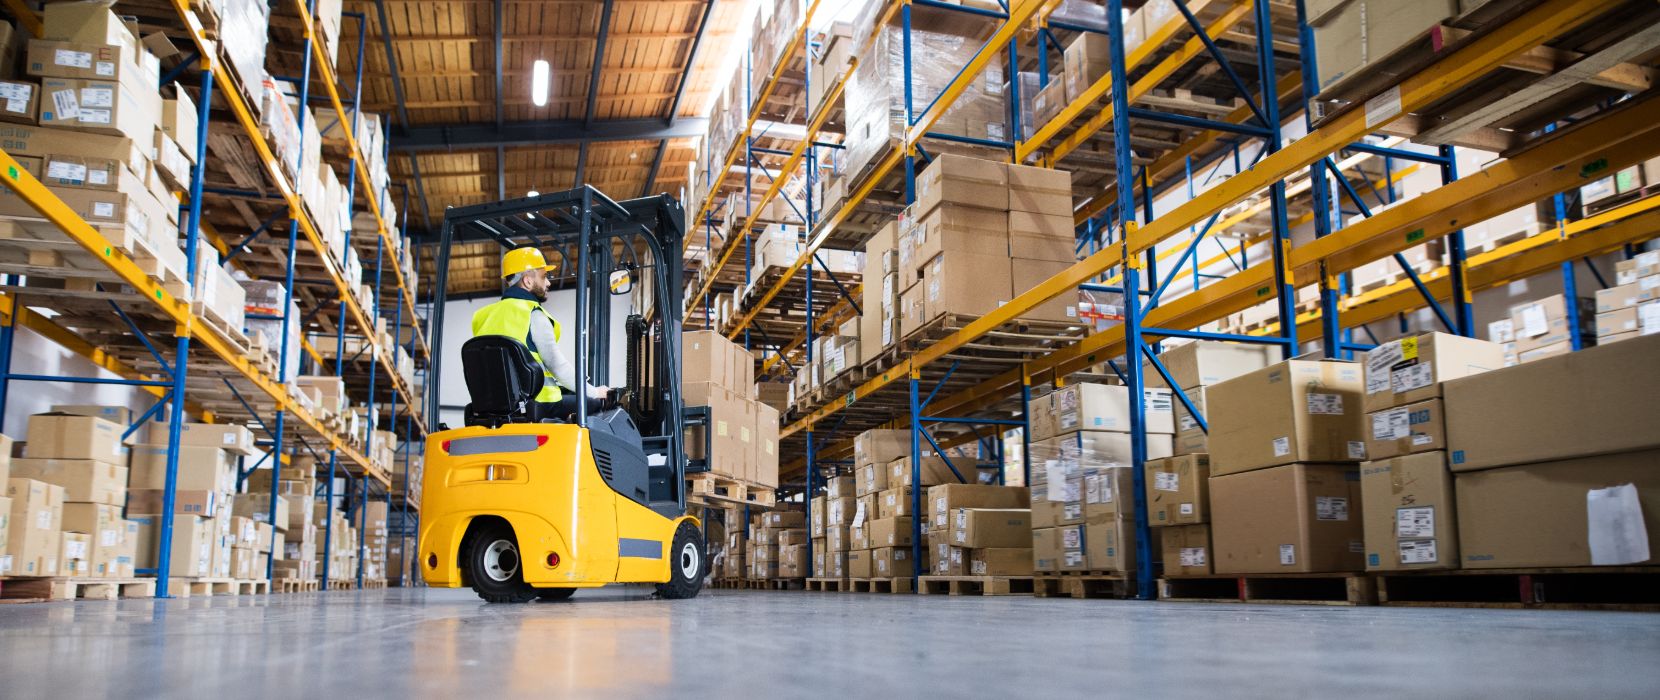 Efficient Warehouse Operations in the Life Sciences Industry